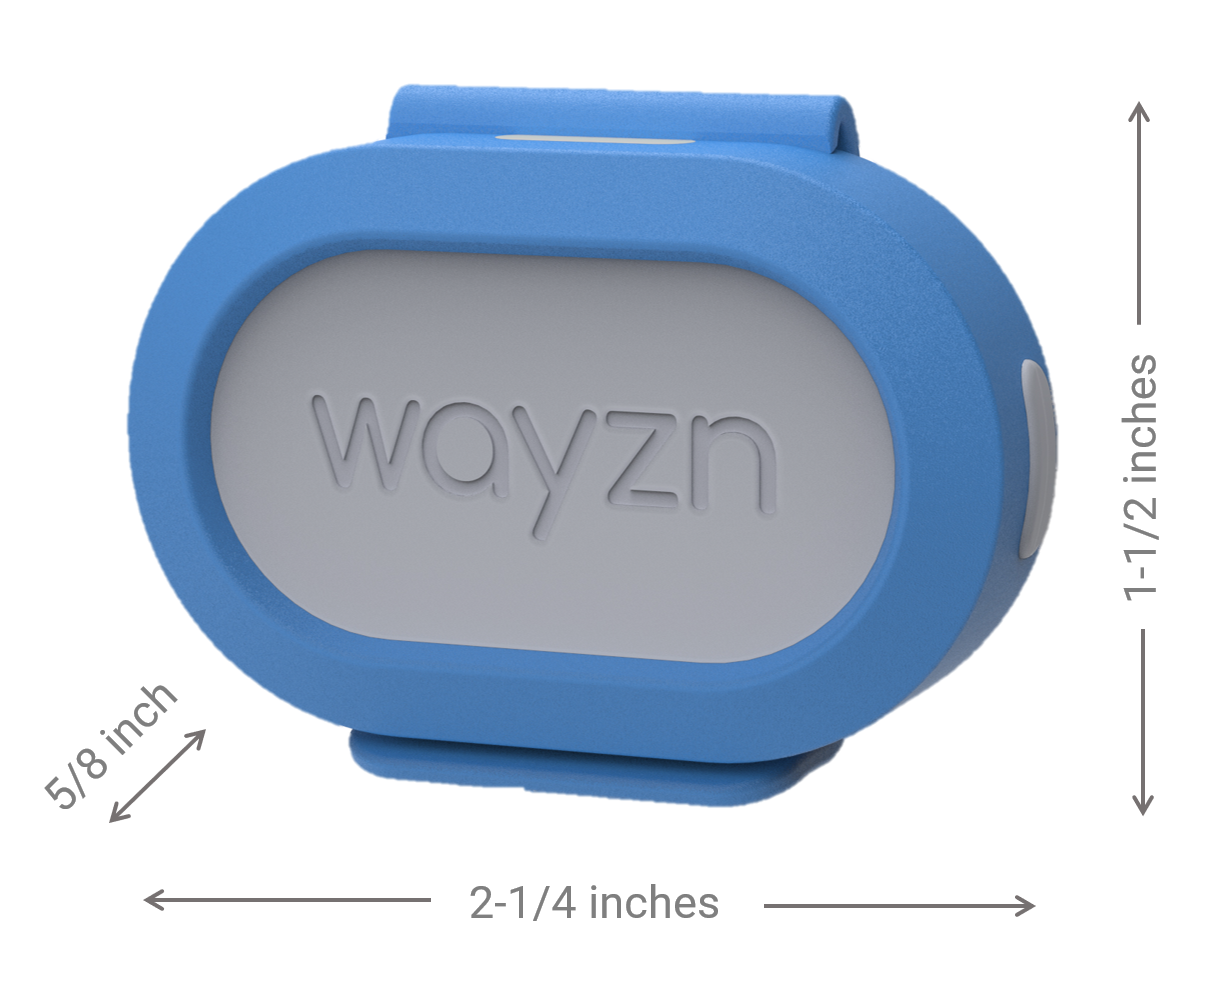 The Wayzn Pet Tag is rugged and waterproof